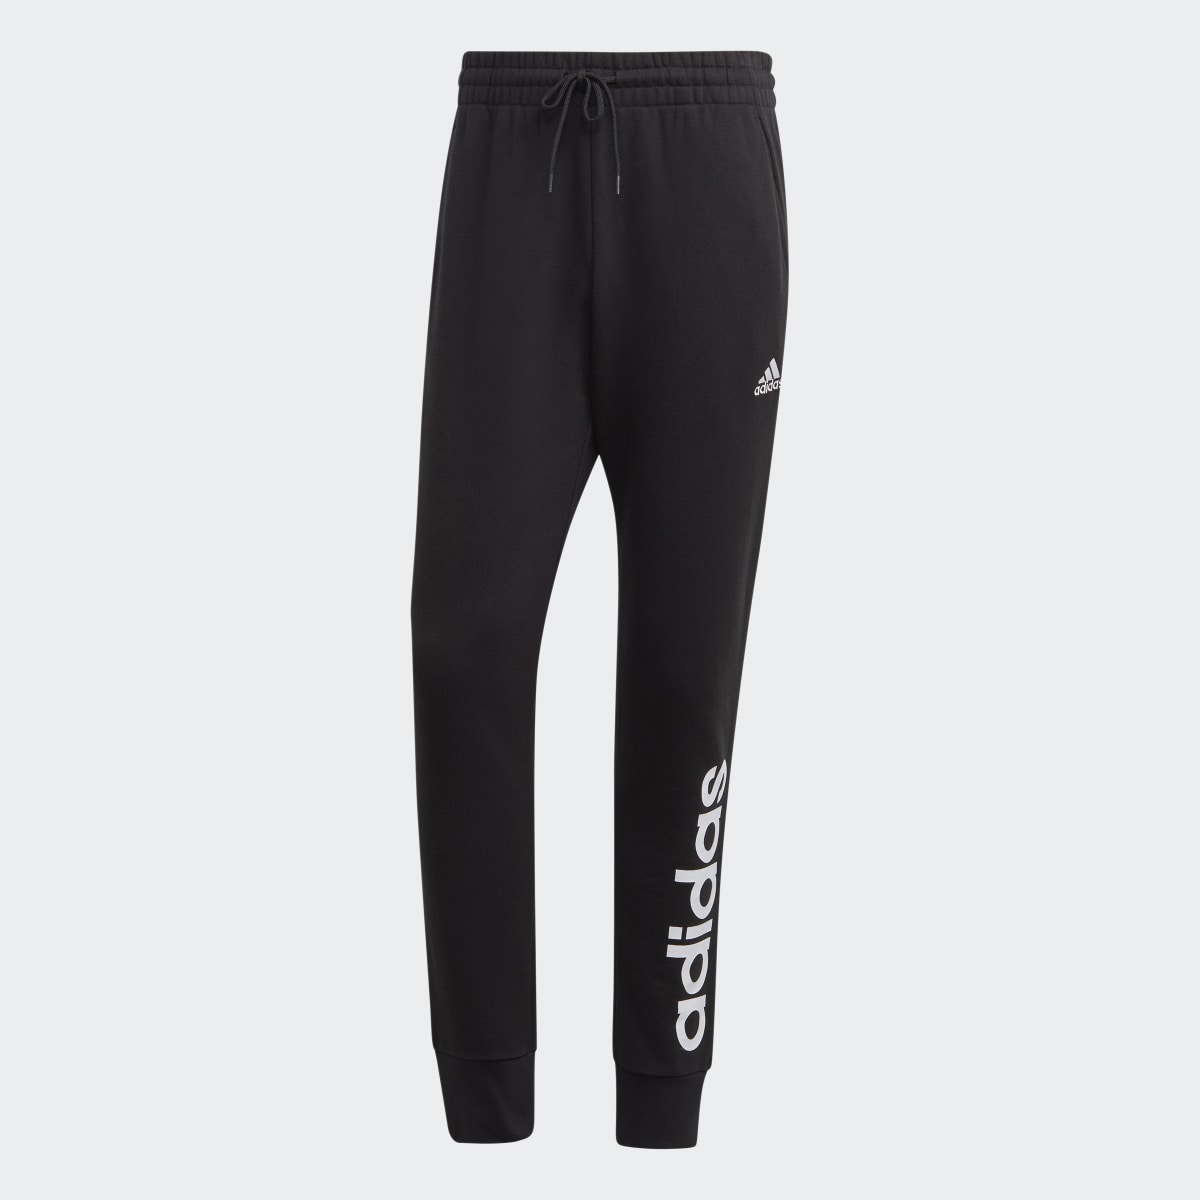 Adidas Pants Essentials French Terry Logo. 4